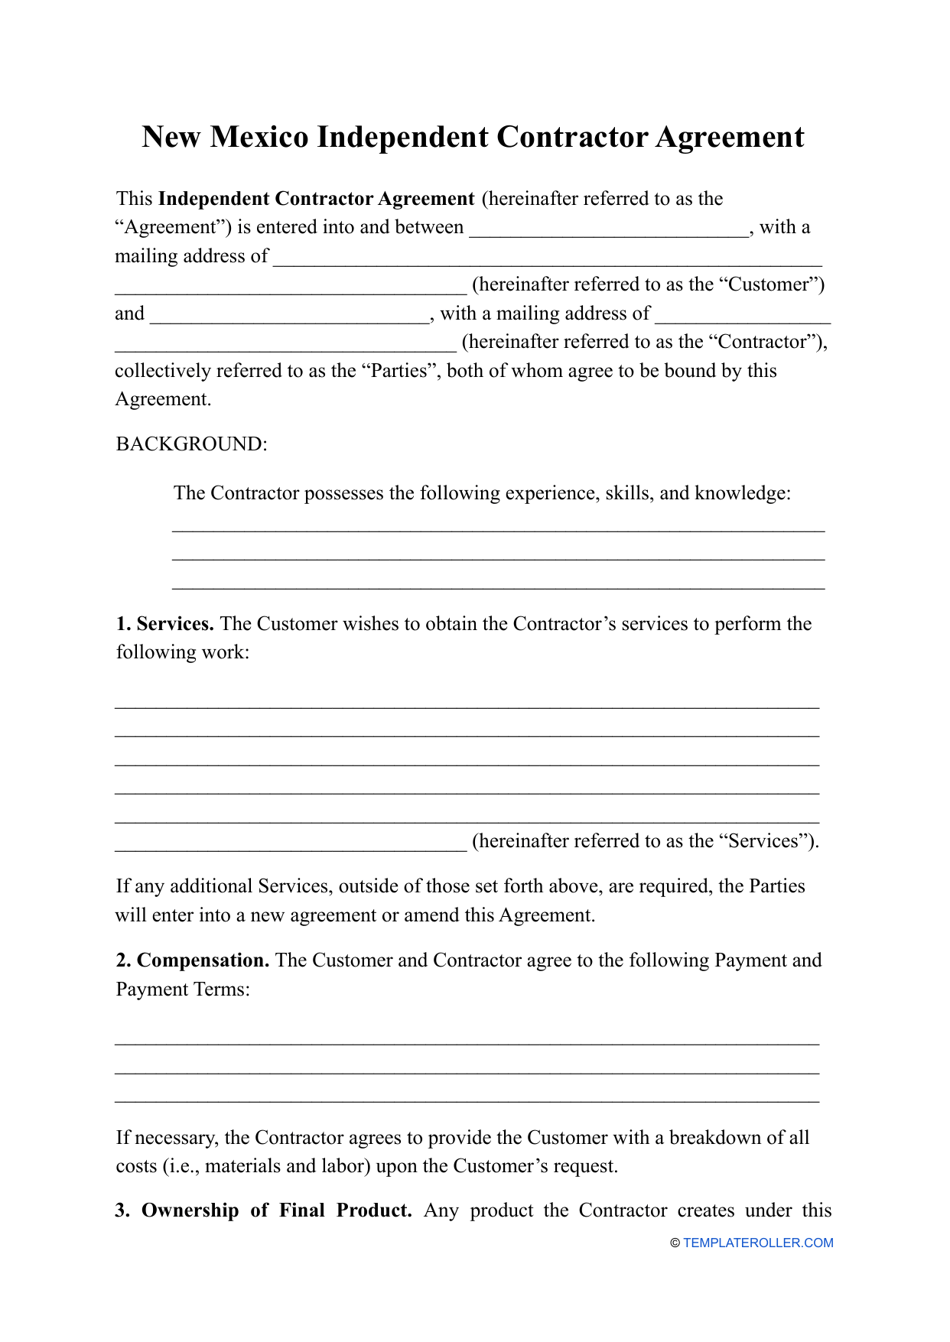 Independent Contractor Agreement Template - New Mexico, Page 1